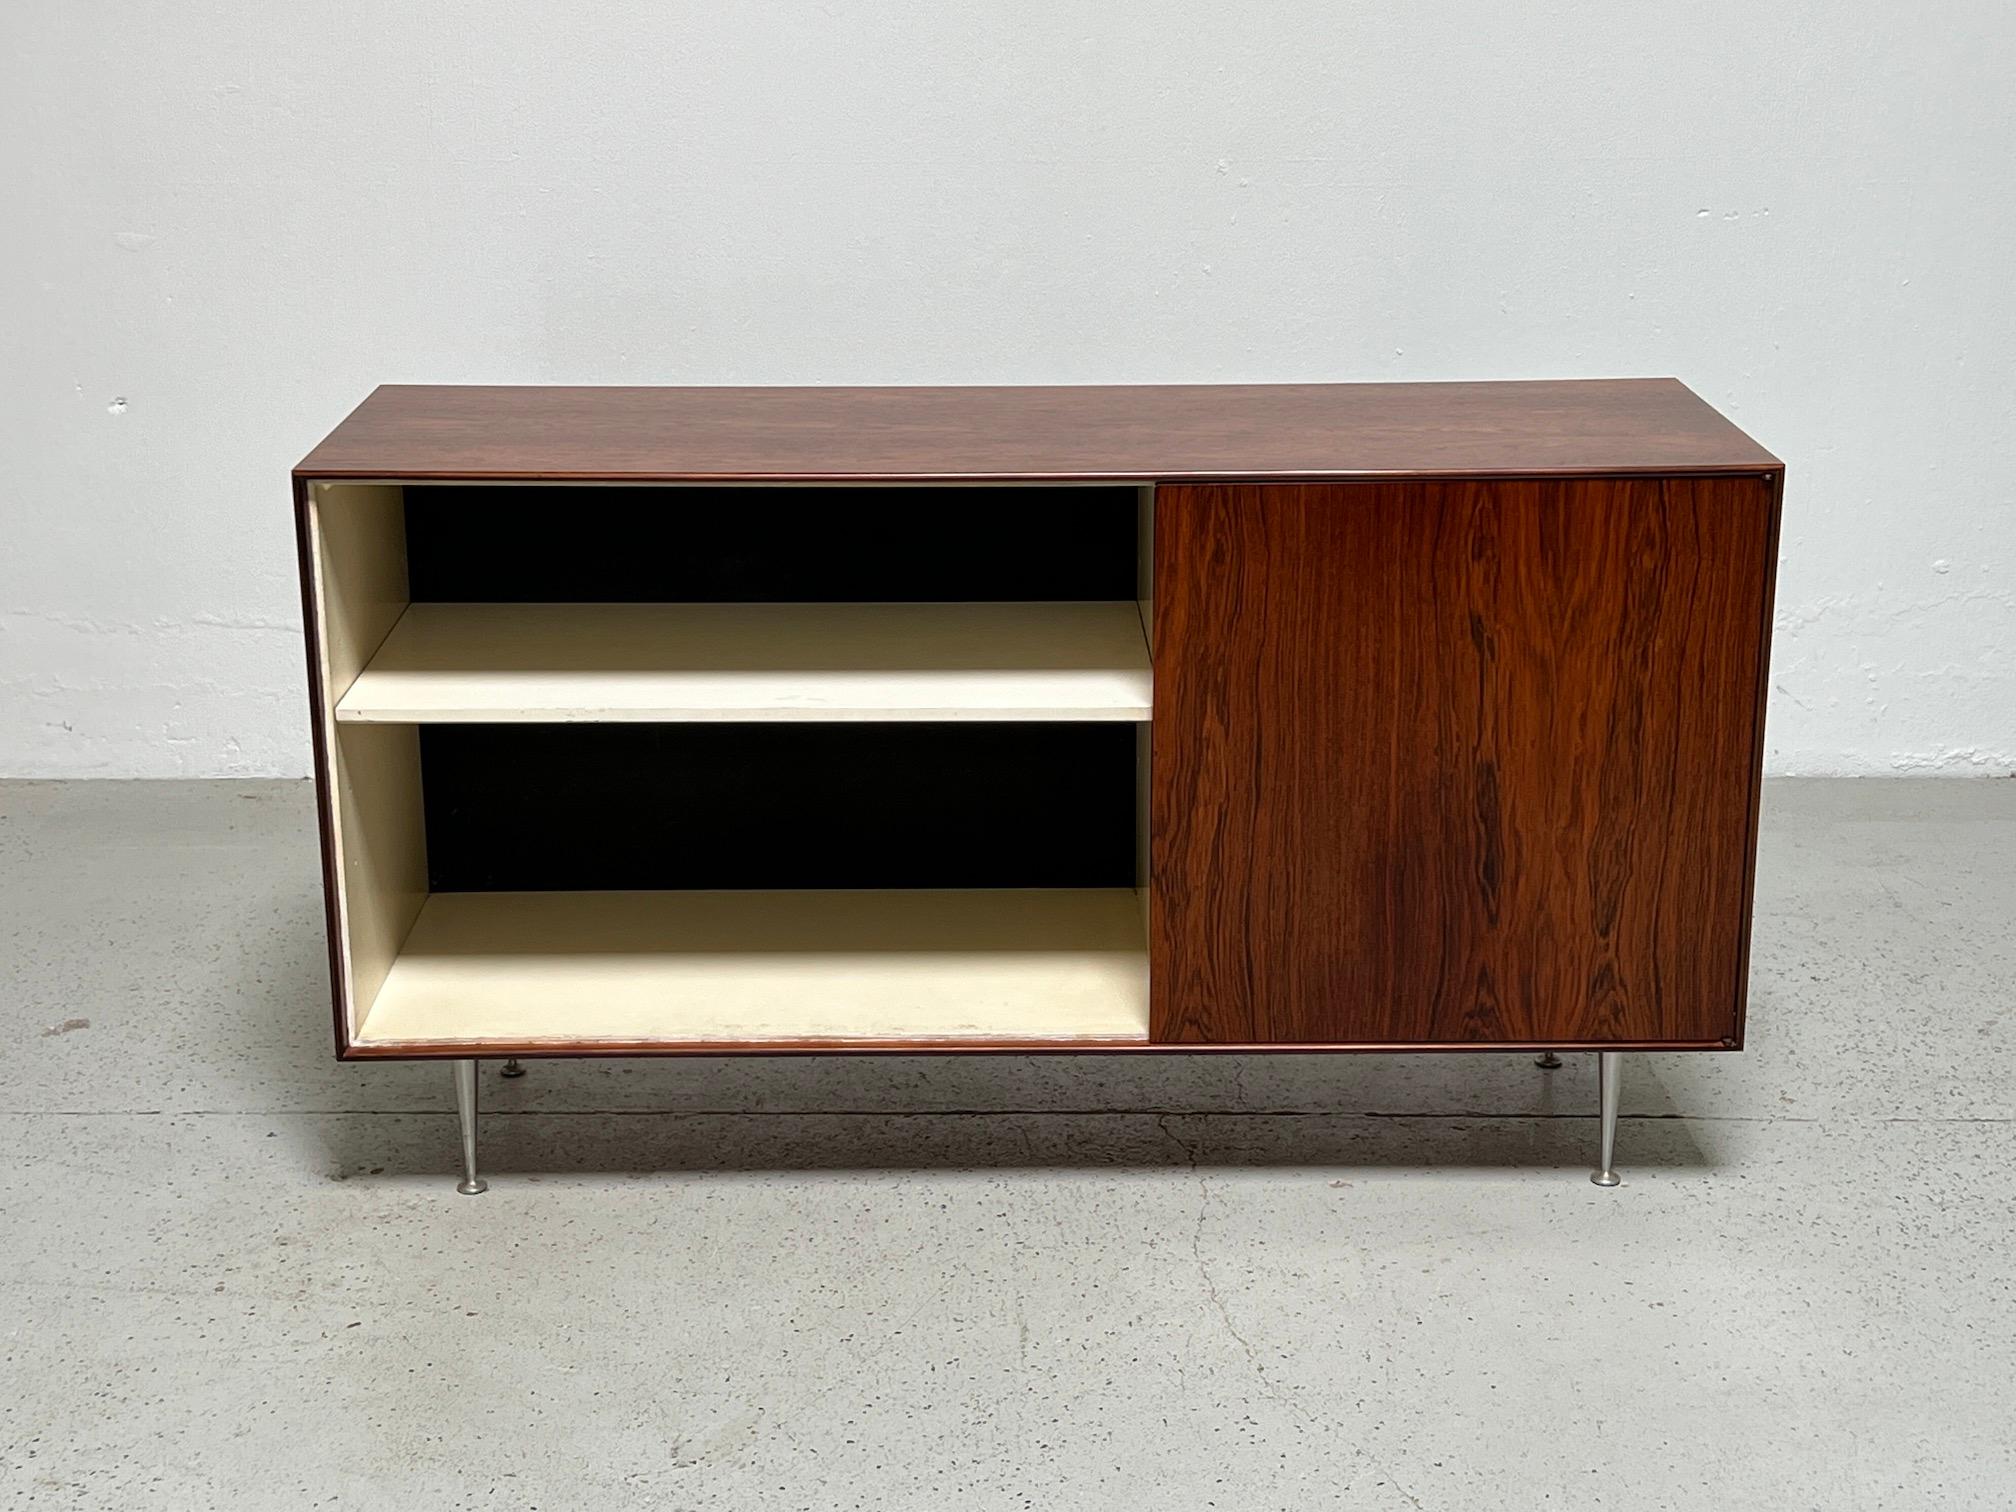 A rosewood thin edge cabinet / bookshelf designed by George Nelson for Herman Miller.